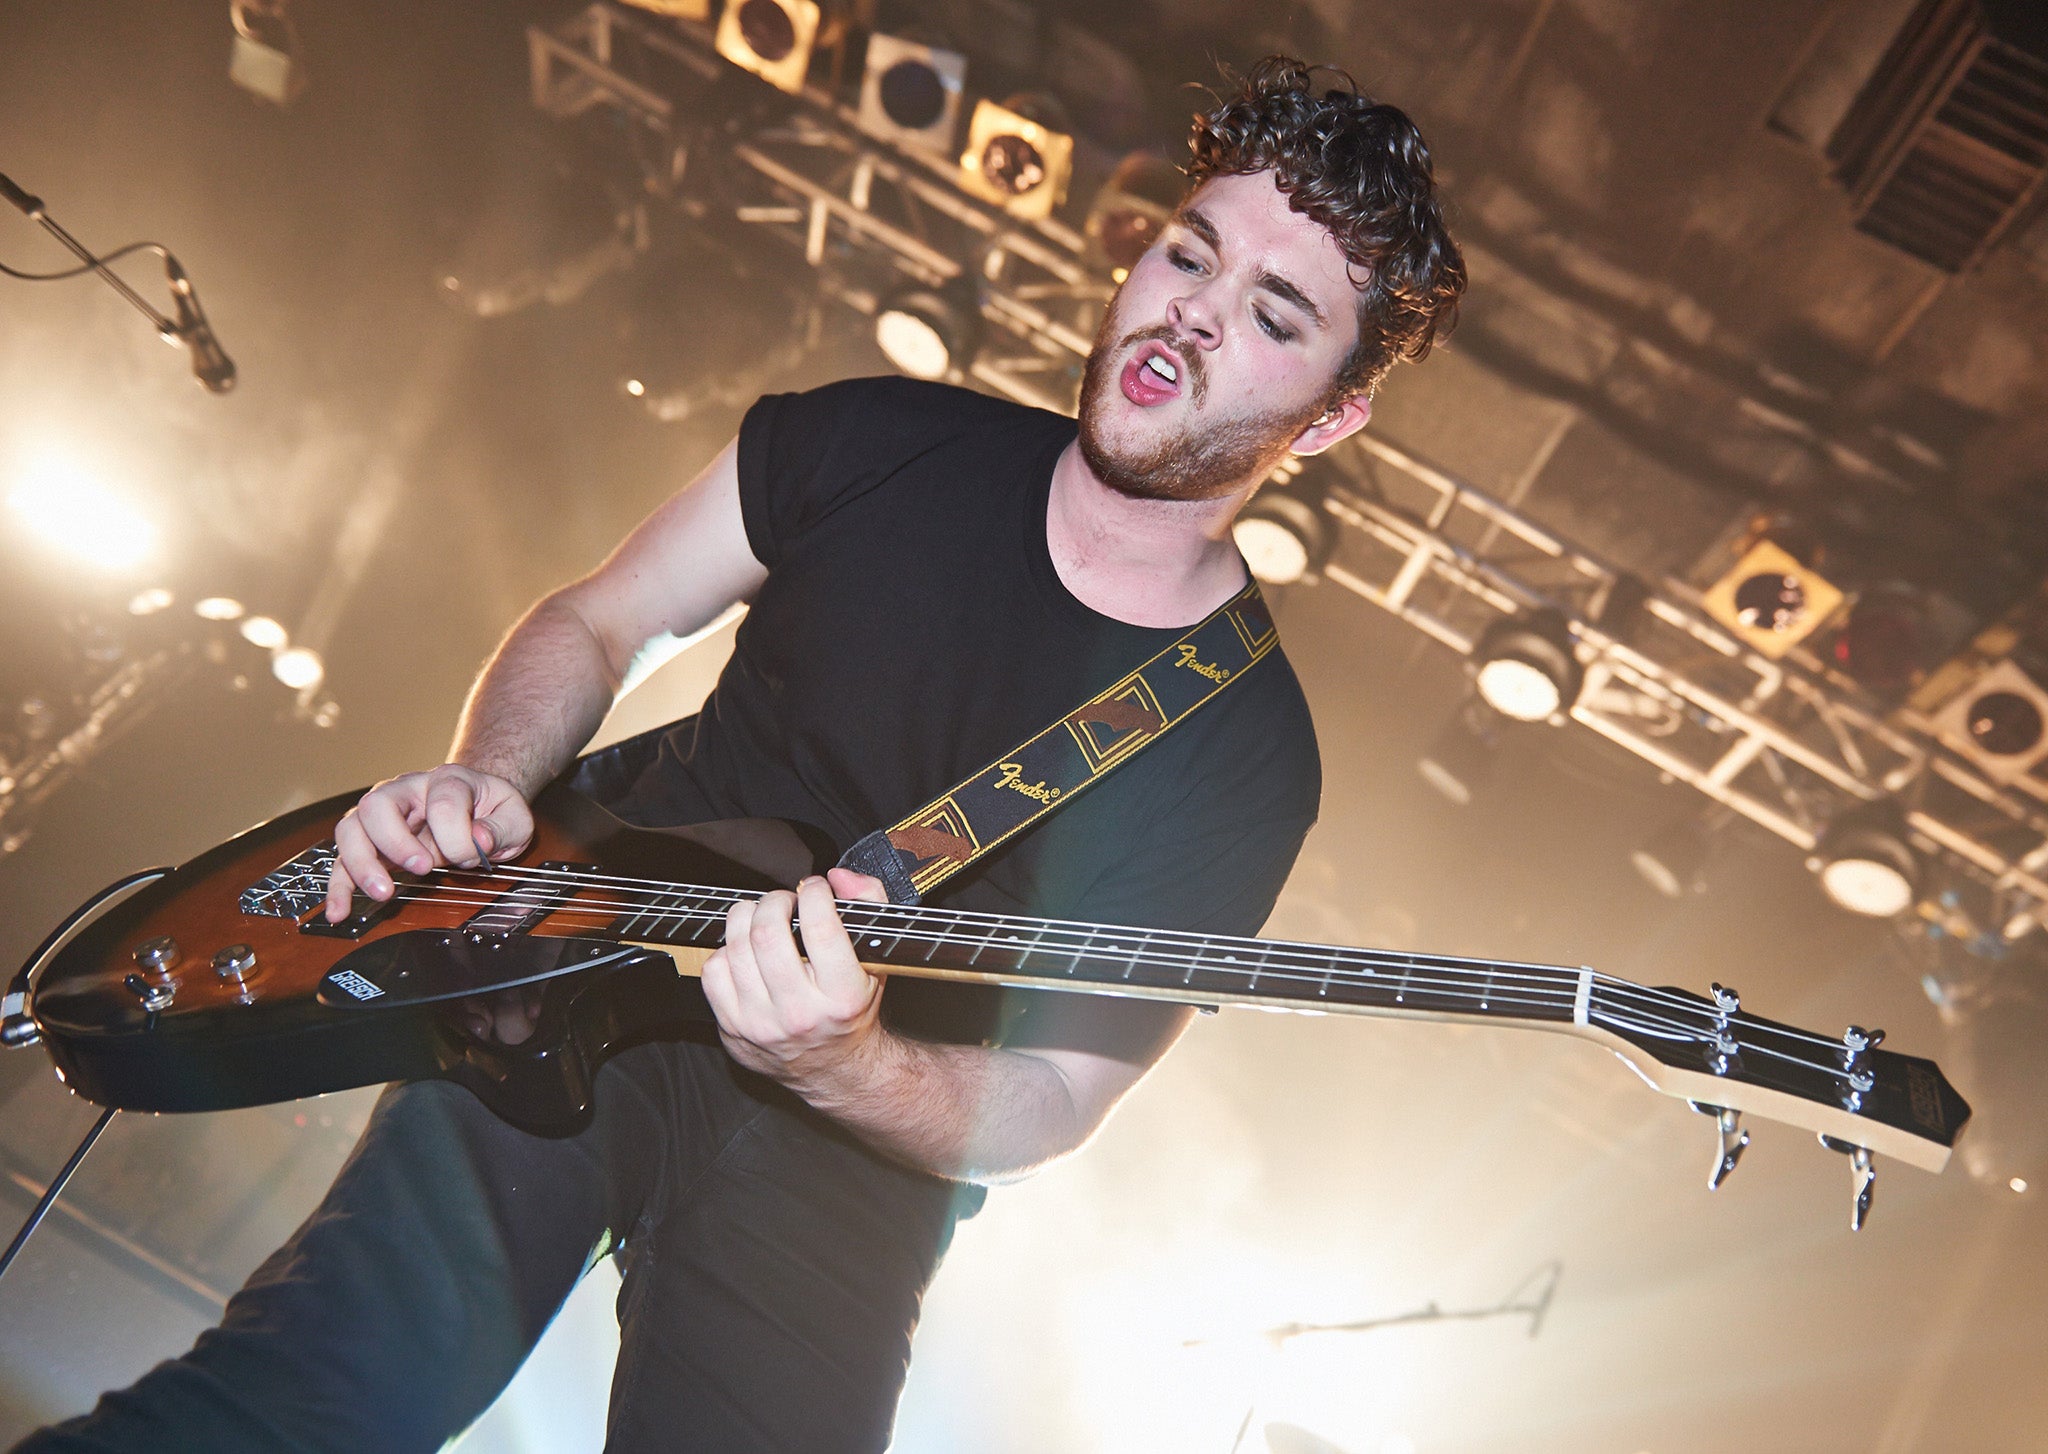 Mike Kerr of the Royal Blood performing at the Electric Ballroom